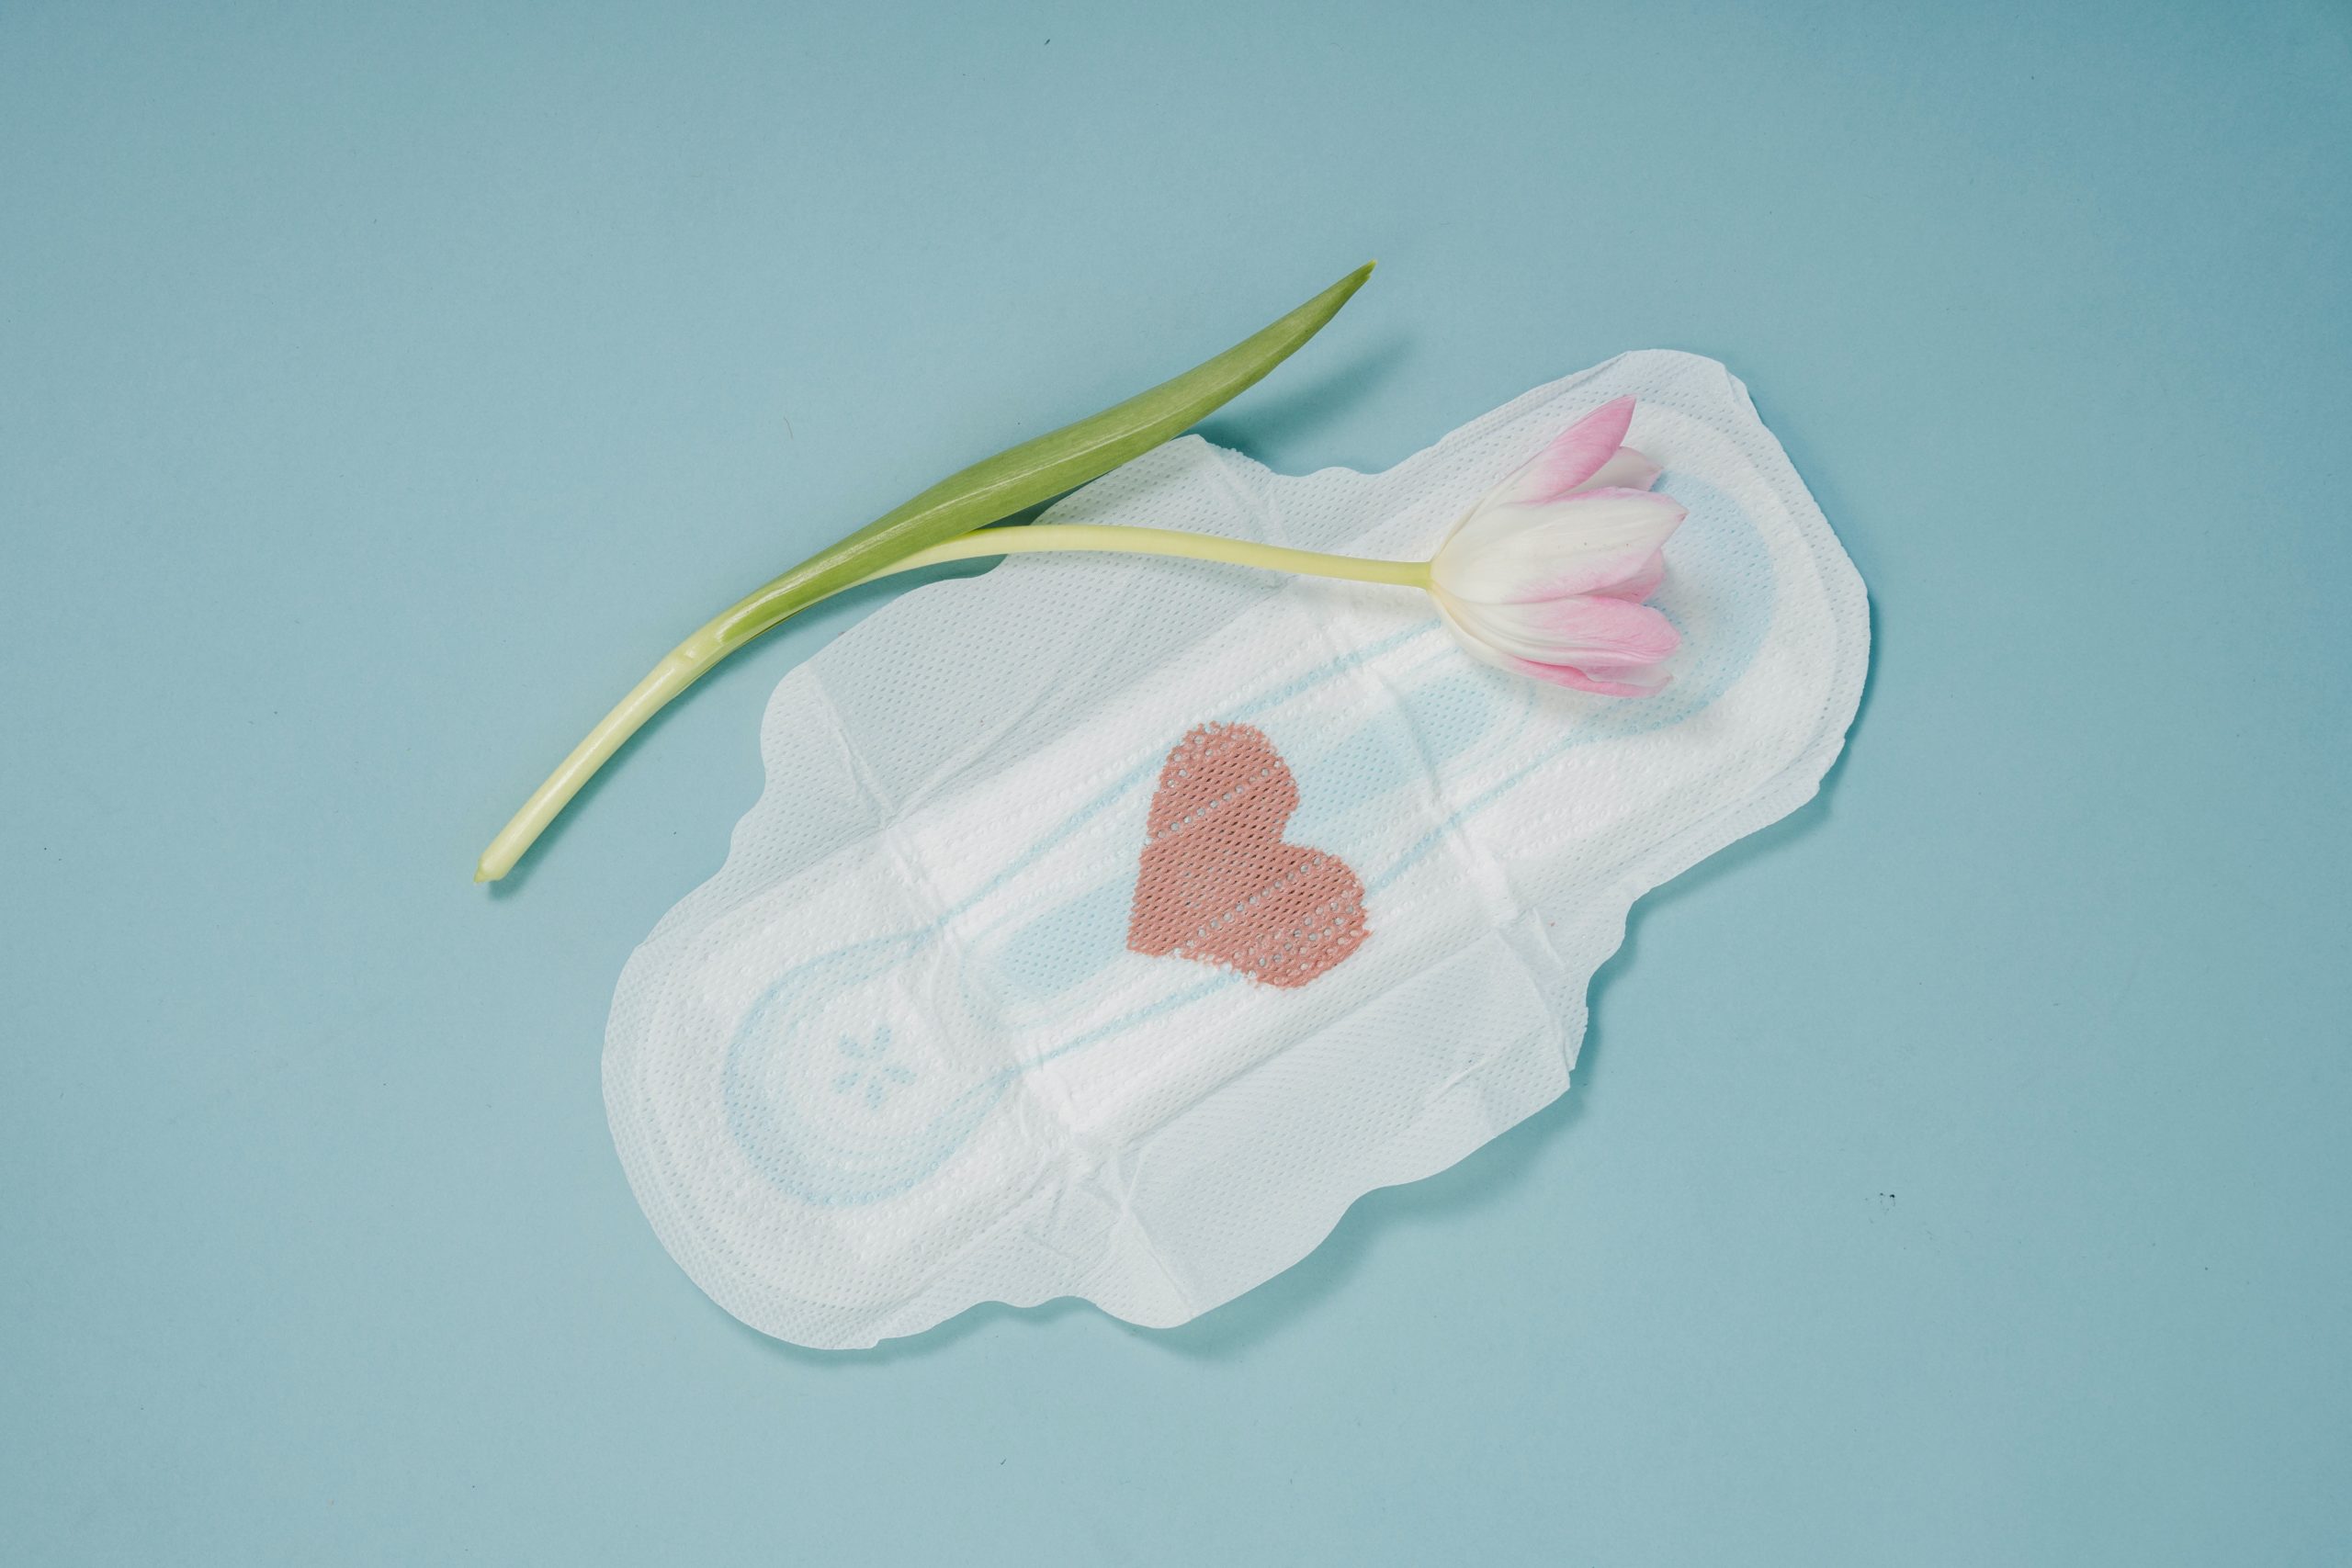 Menstruation: More than just a period